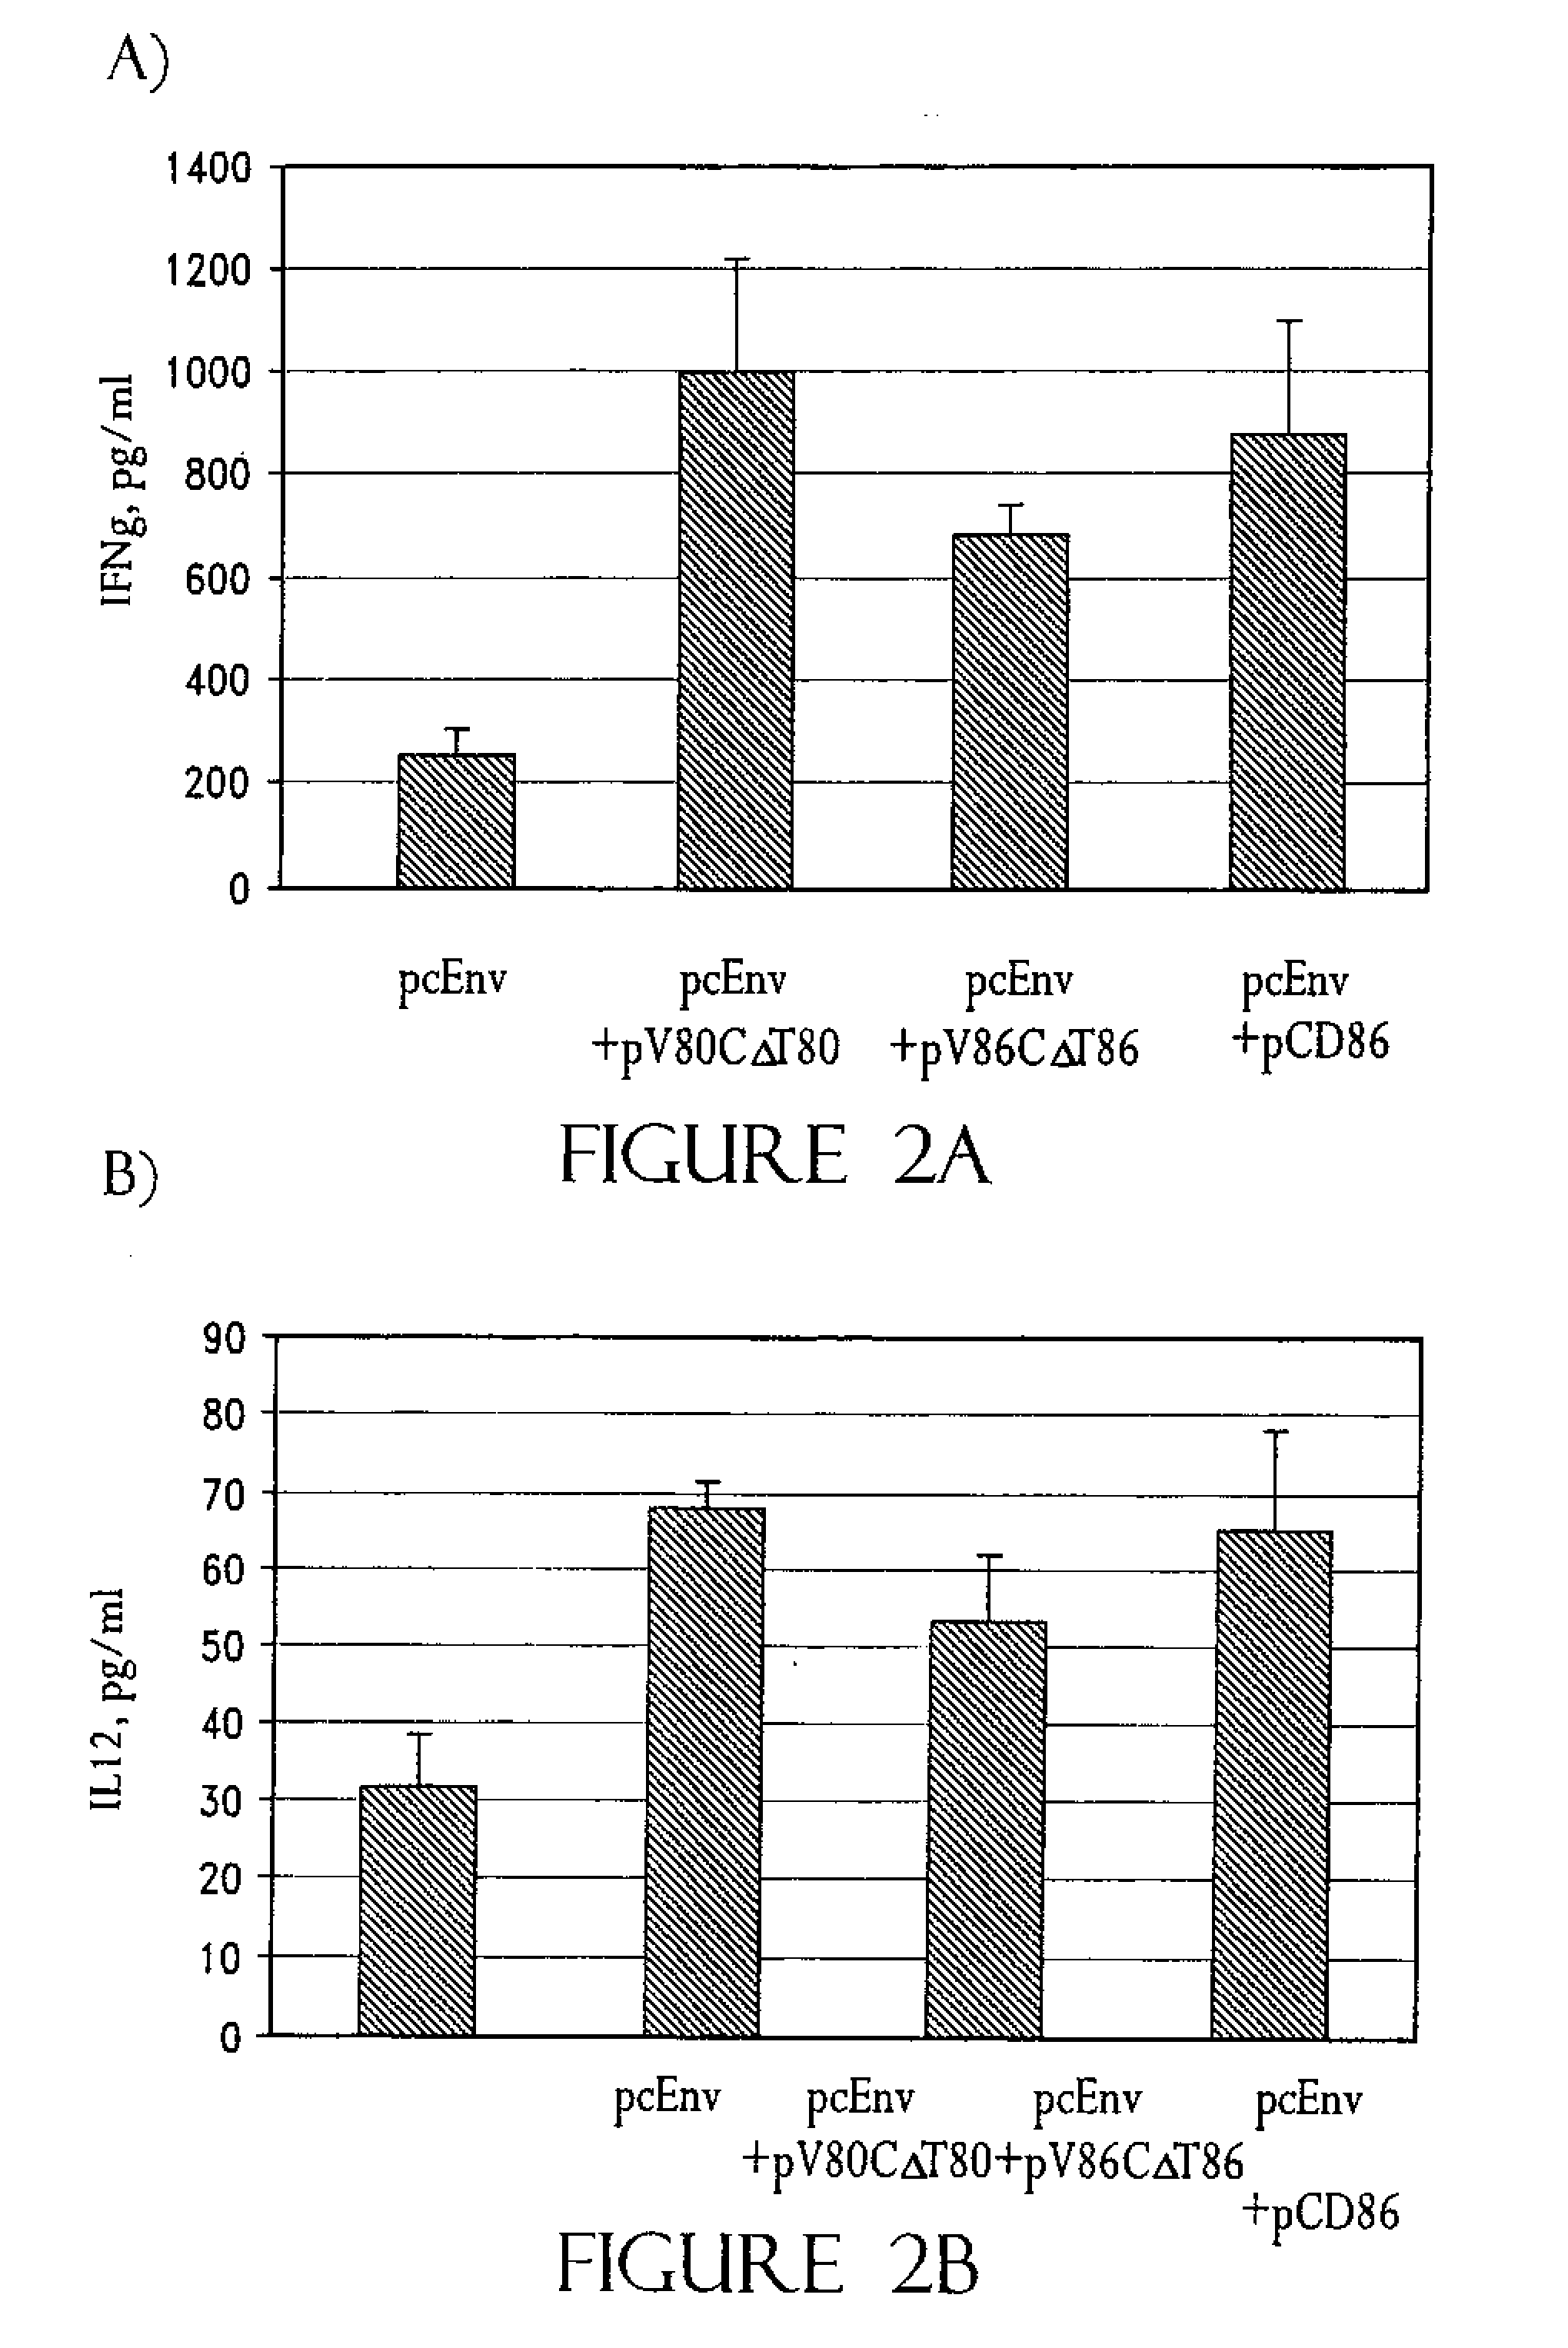 Mutant human cd80 and compositions for and methods of making and using the same